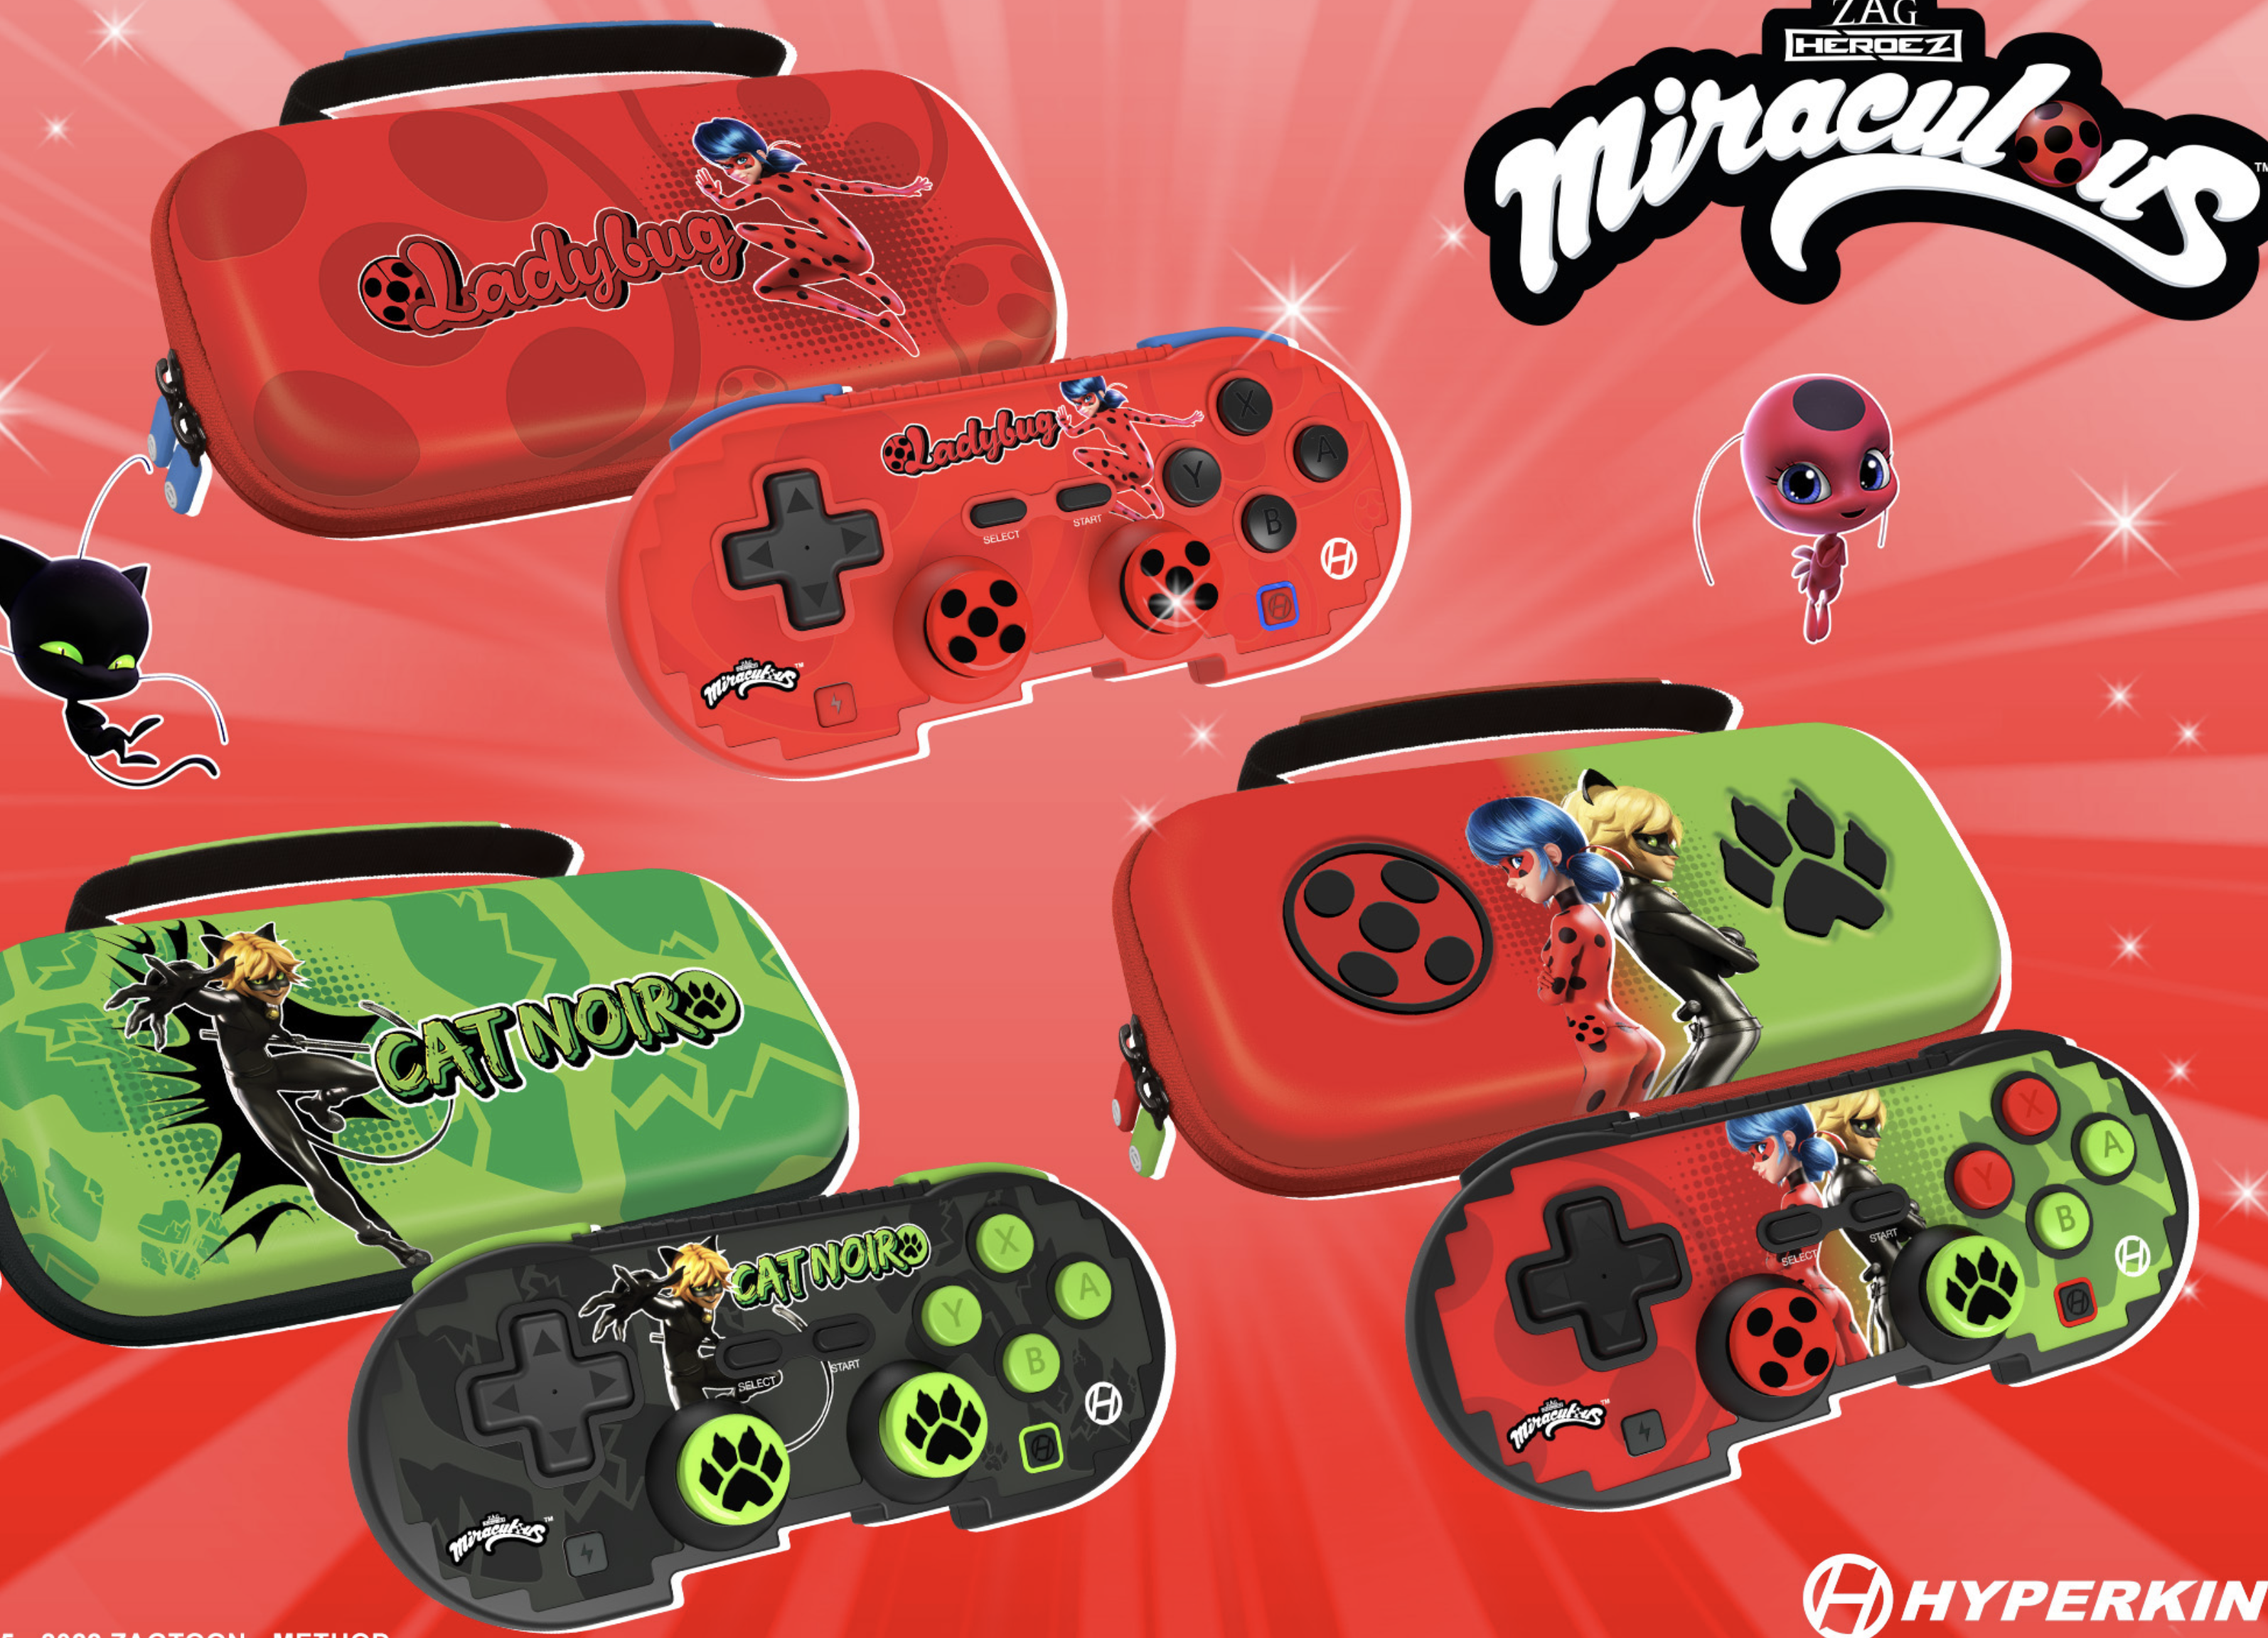 ZAG Builds on Gaming Success with Exclusive Miraculous Hardware